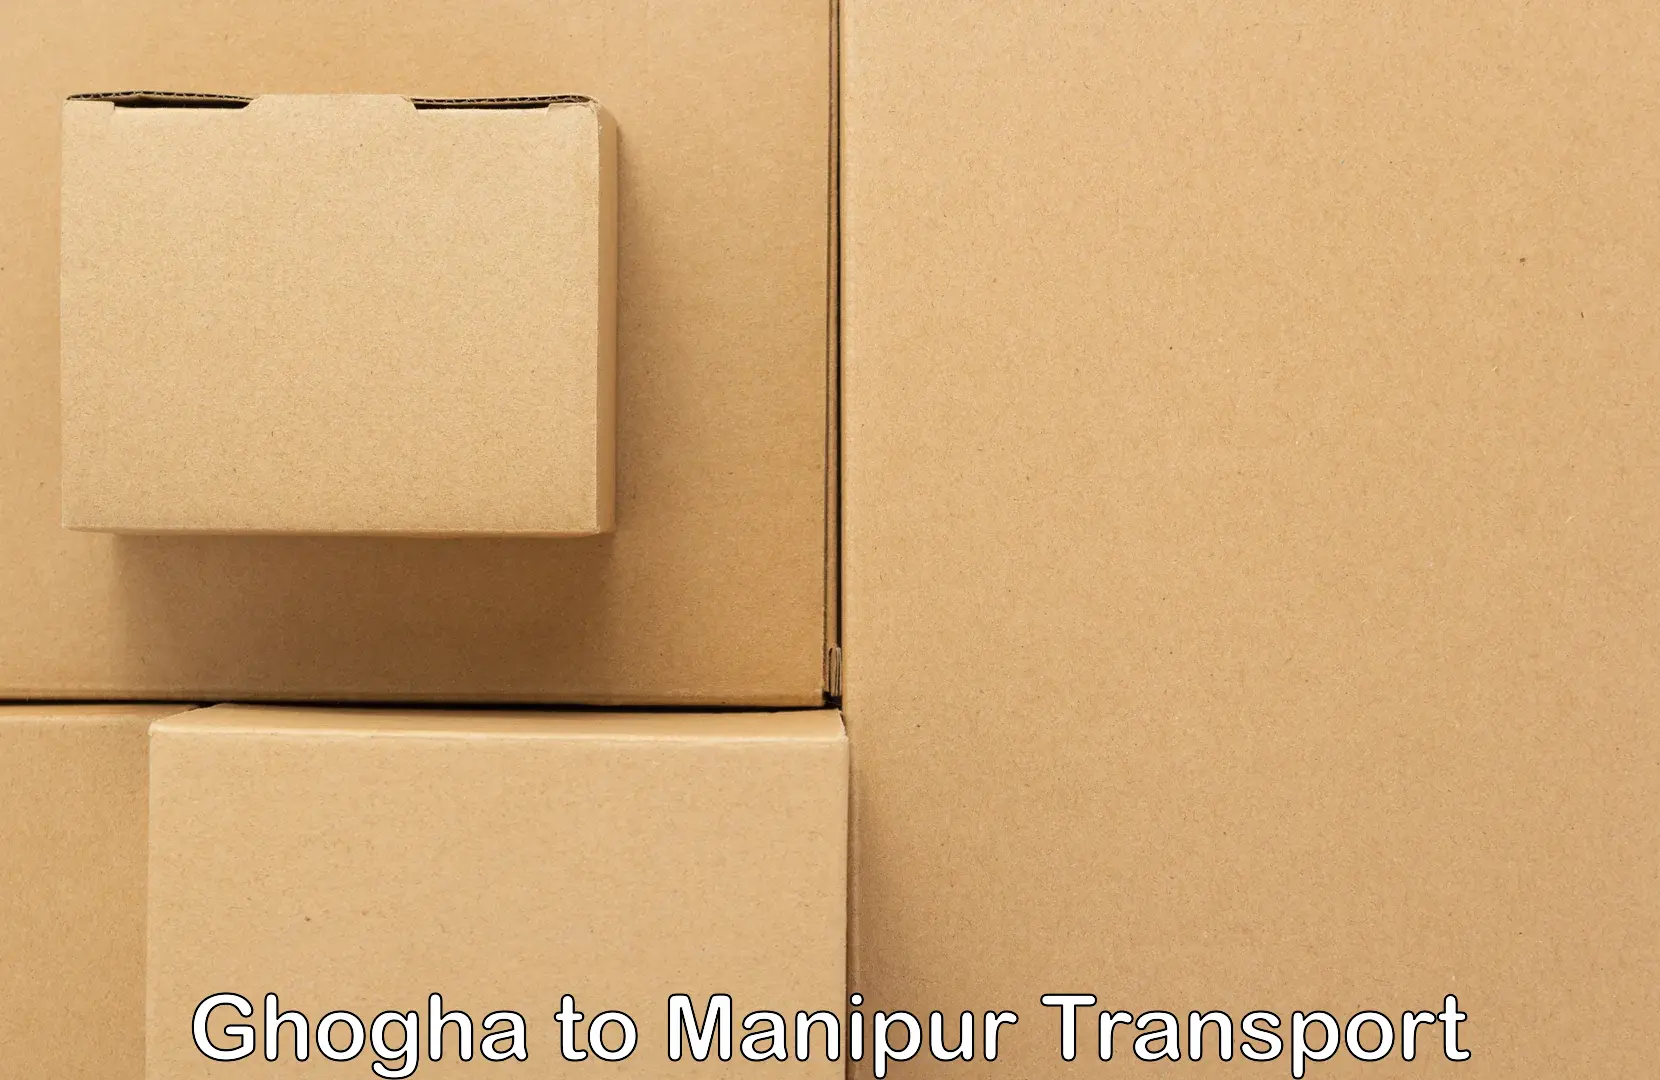 Cycle transportation service Ghogha to Manipur